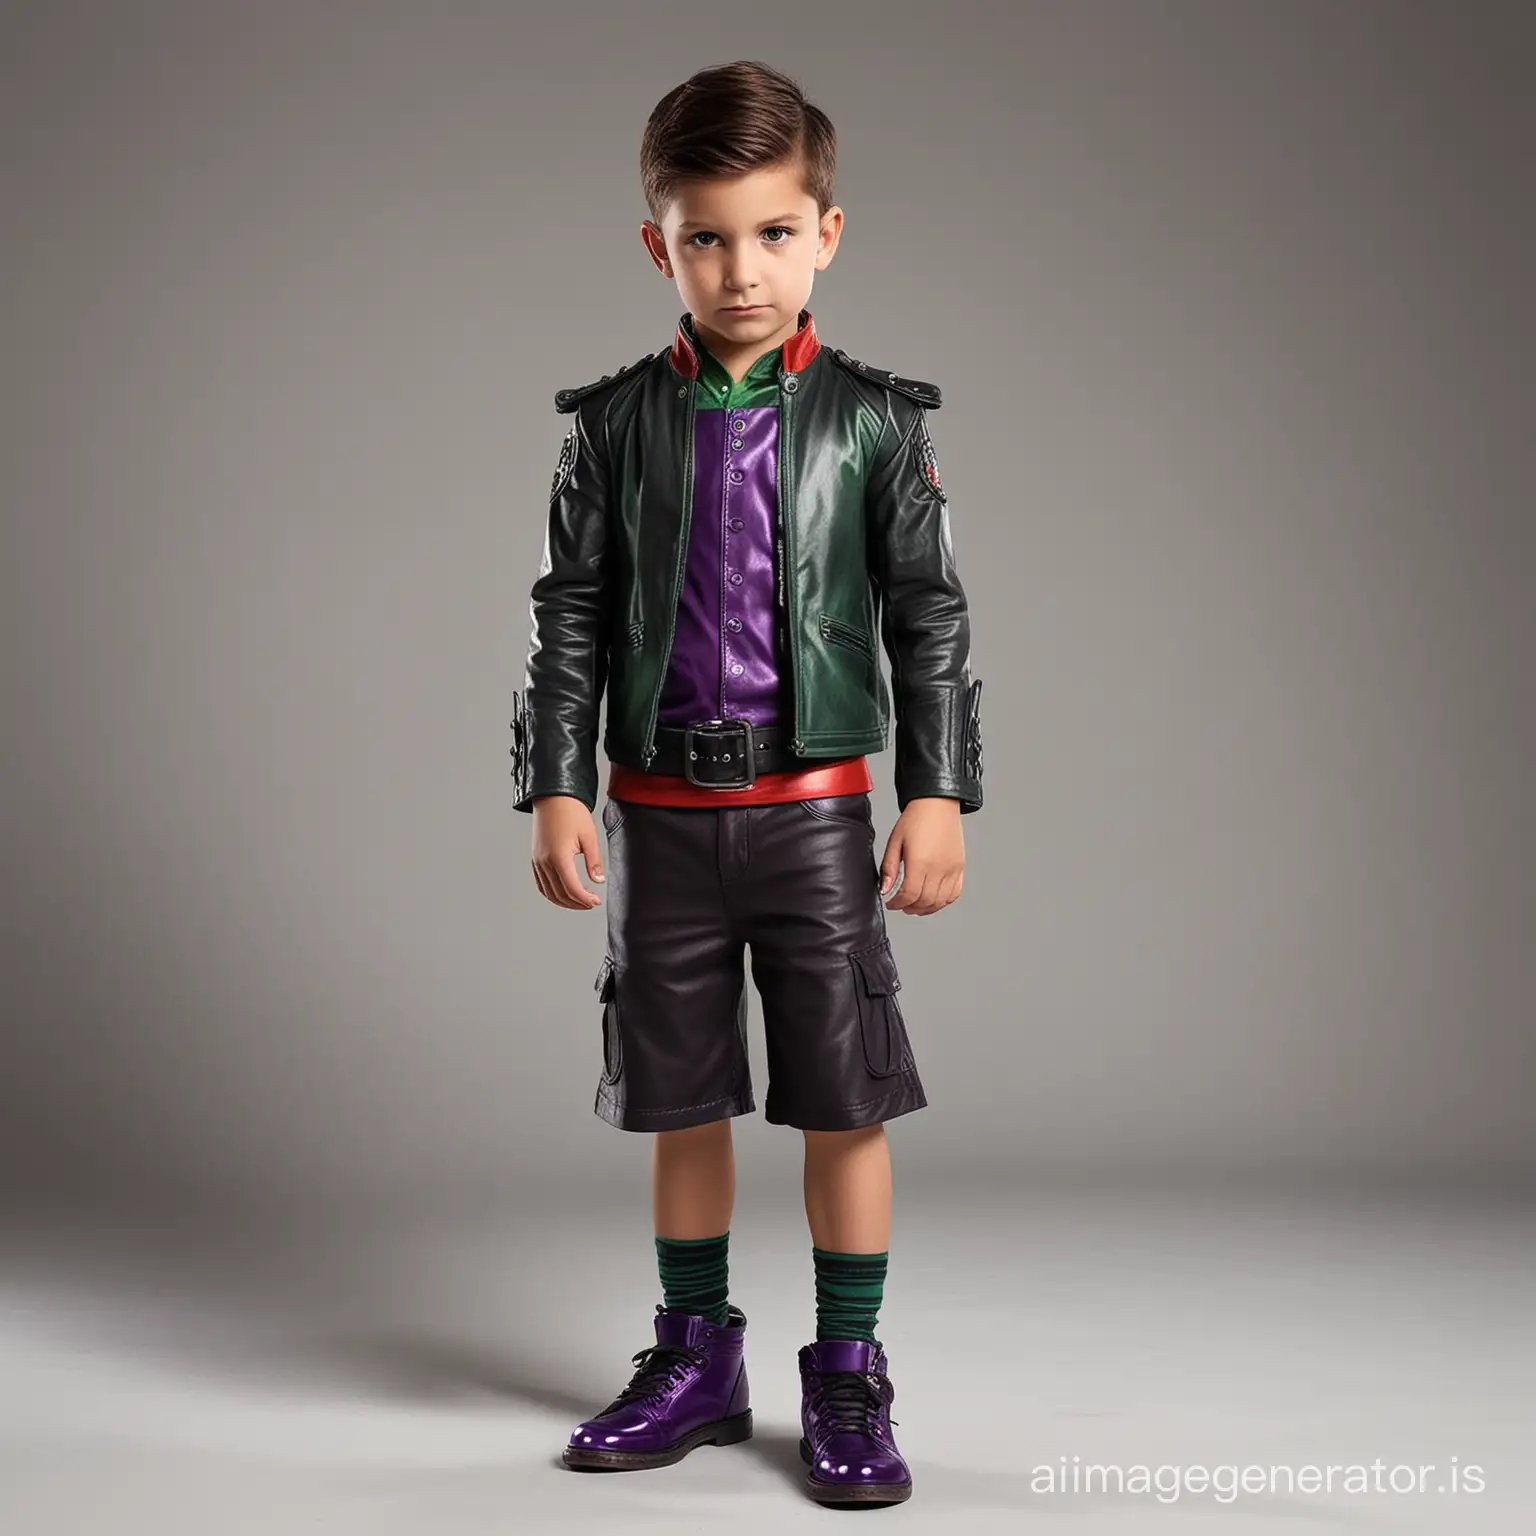 Create a villain outfit for a strong 8 year old boy villain with abs, cool, wicked, leather, shorts, comfortable yet intimidating, various shades of purple with hints of both green and red, both red and green should be included in every outfit but purple should be the main color, the shoes should also be colorful and match the outfit